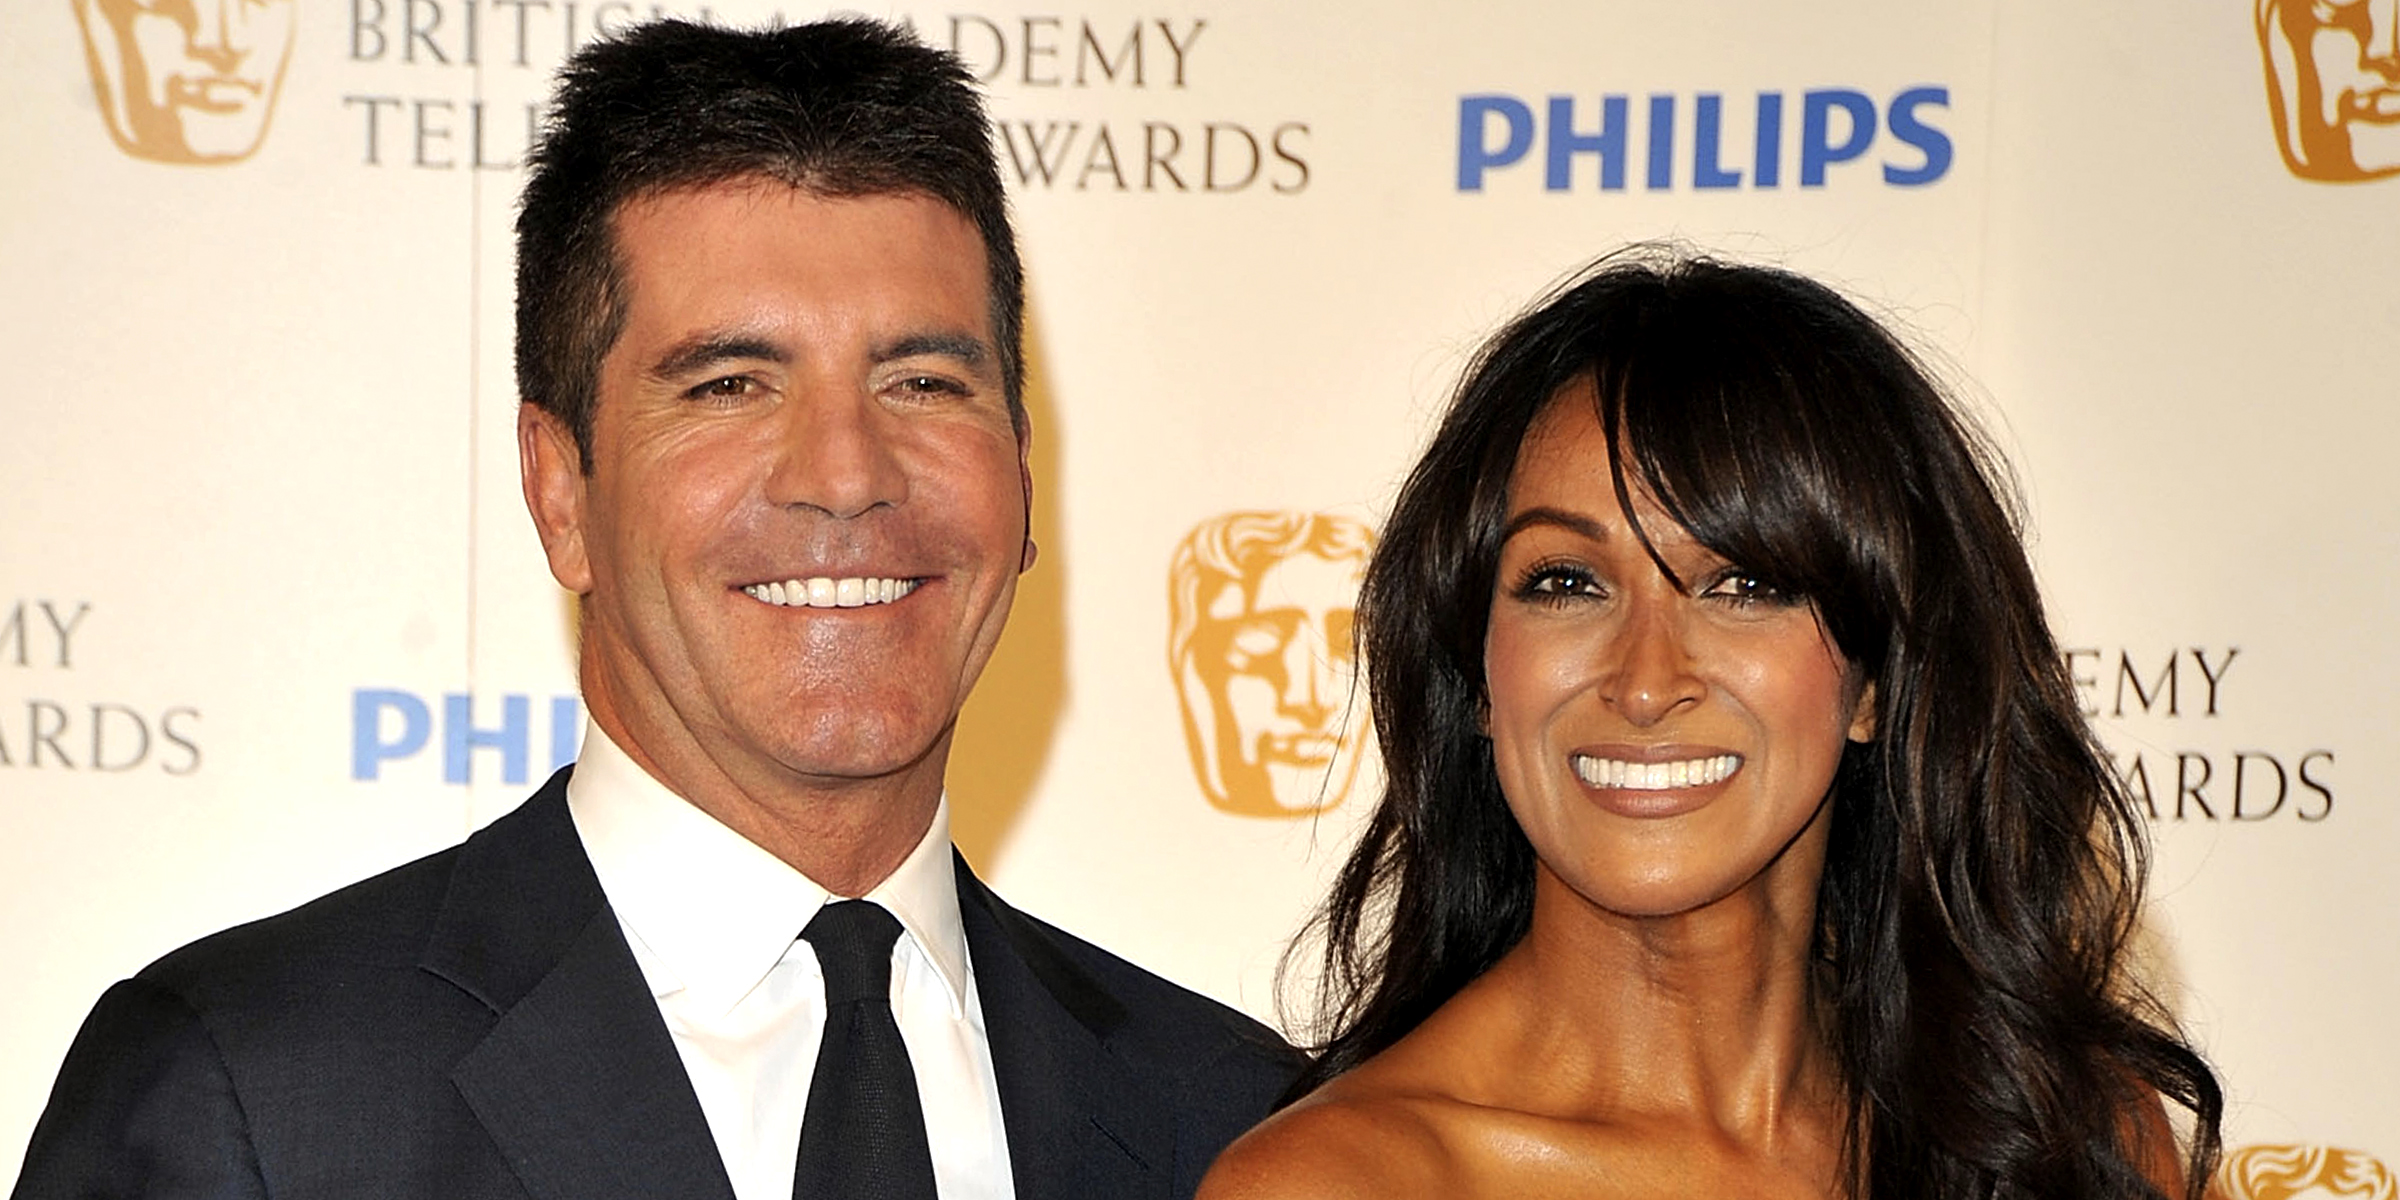 Simon Cowell and Jackie St. Claire | Source: Getty Images